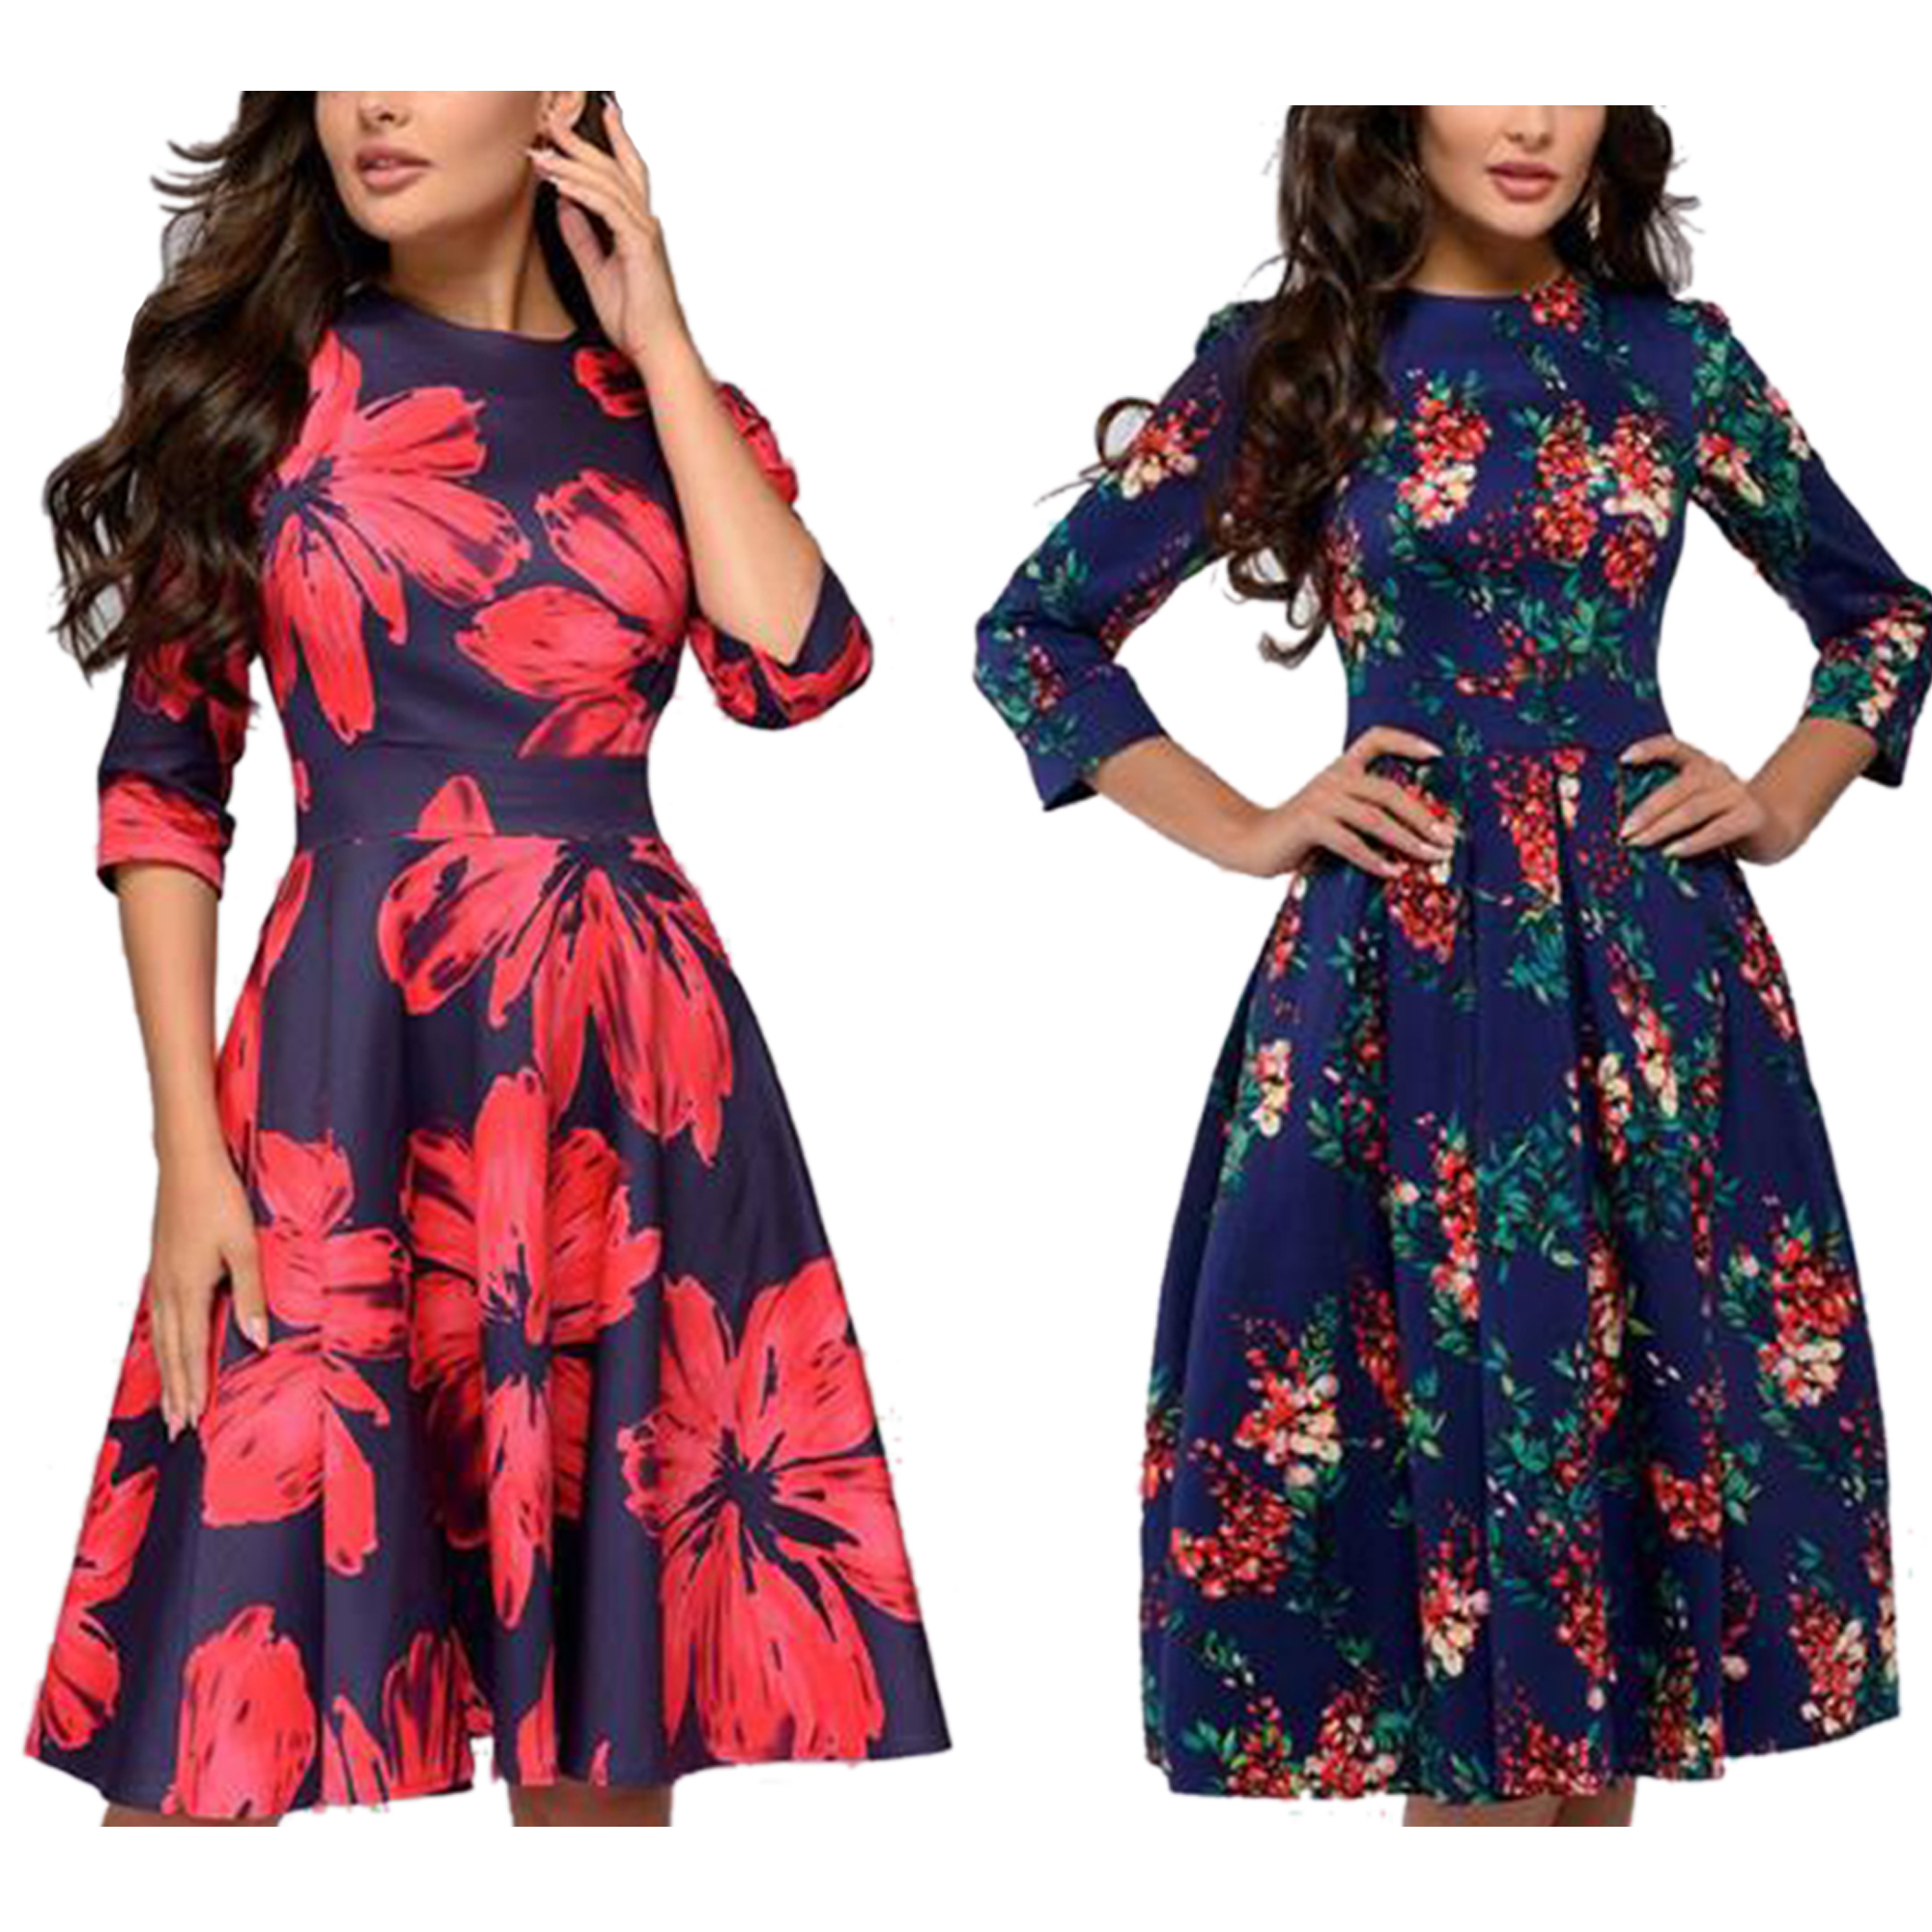 HULKY Womens Vintage 3/4 Sleeve Loose Pleated Maxi Dress Floral Print Flowy Elegant Casual A-line Long Dresses with Pockets